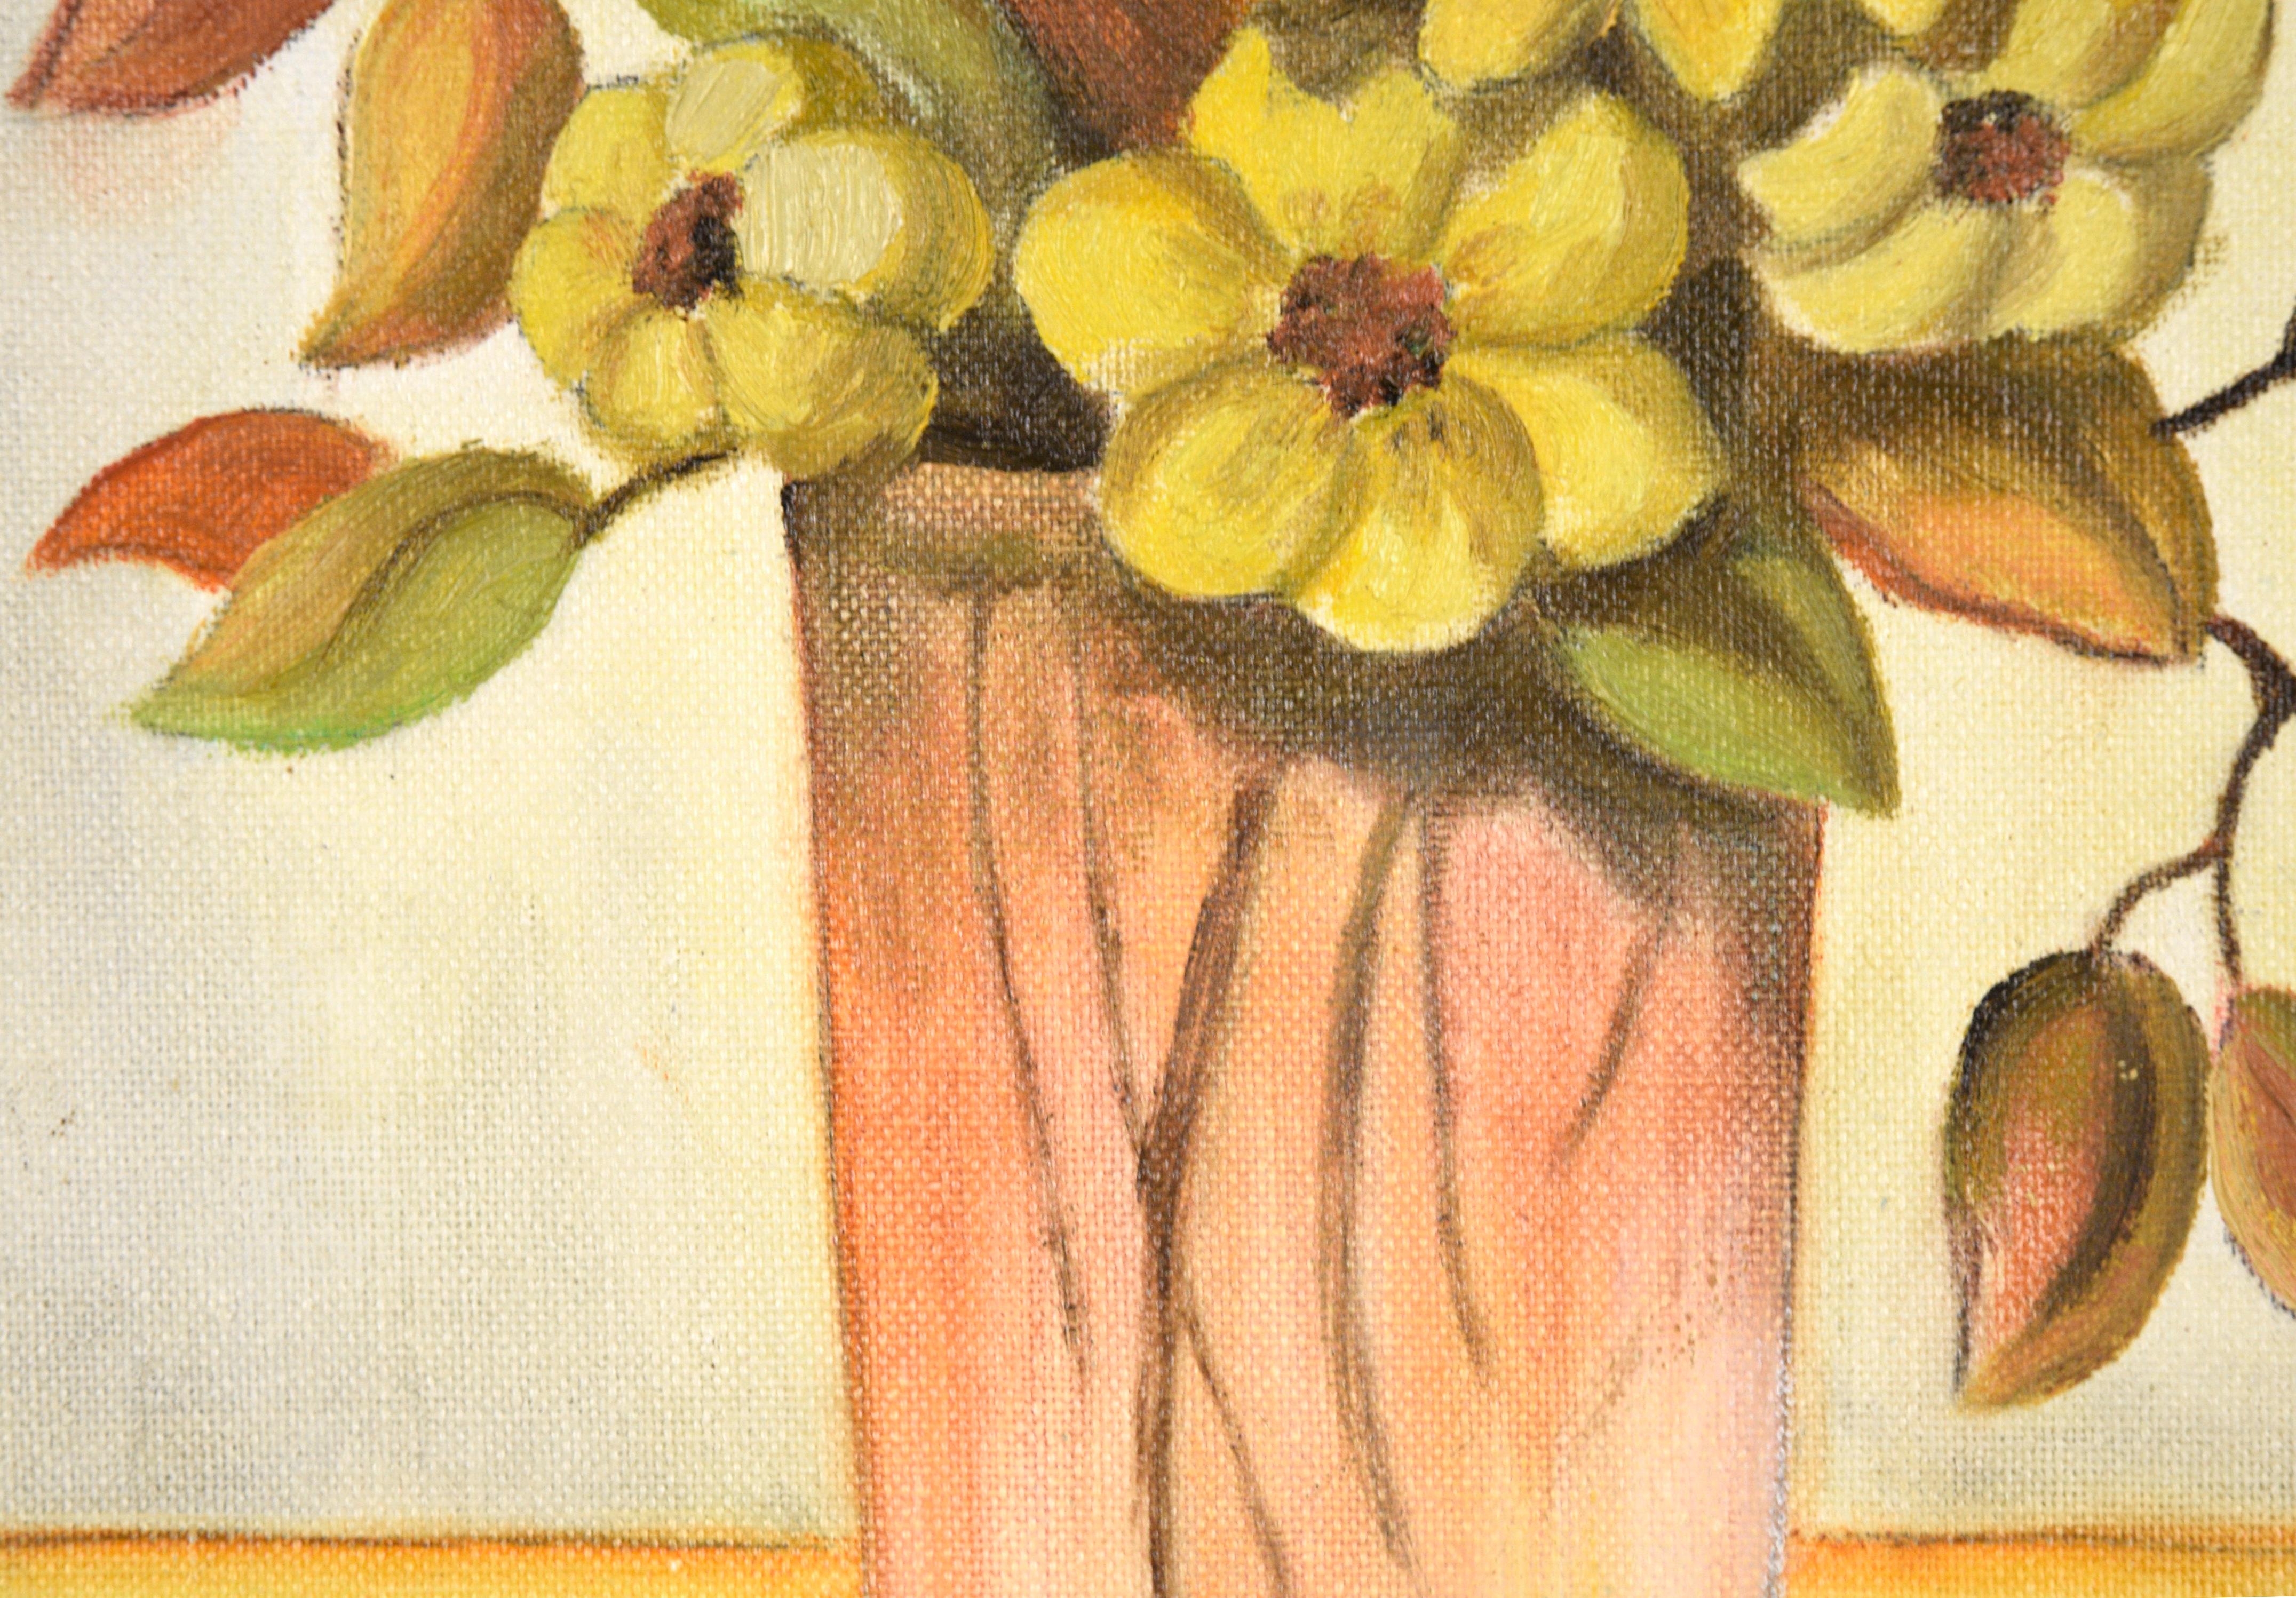 Mid Century Still Life with Yellow Flowers and Orange Leaves - Beige Still-Life Painting by Jean M. Stites